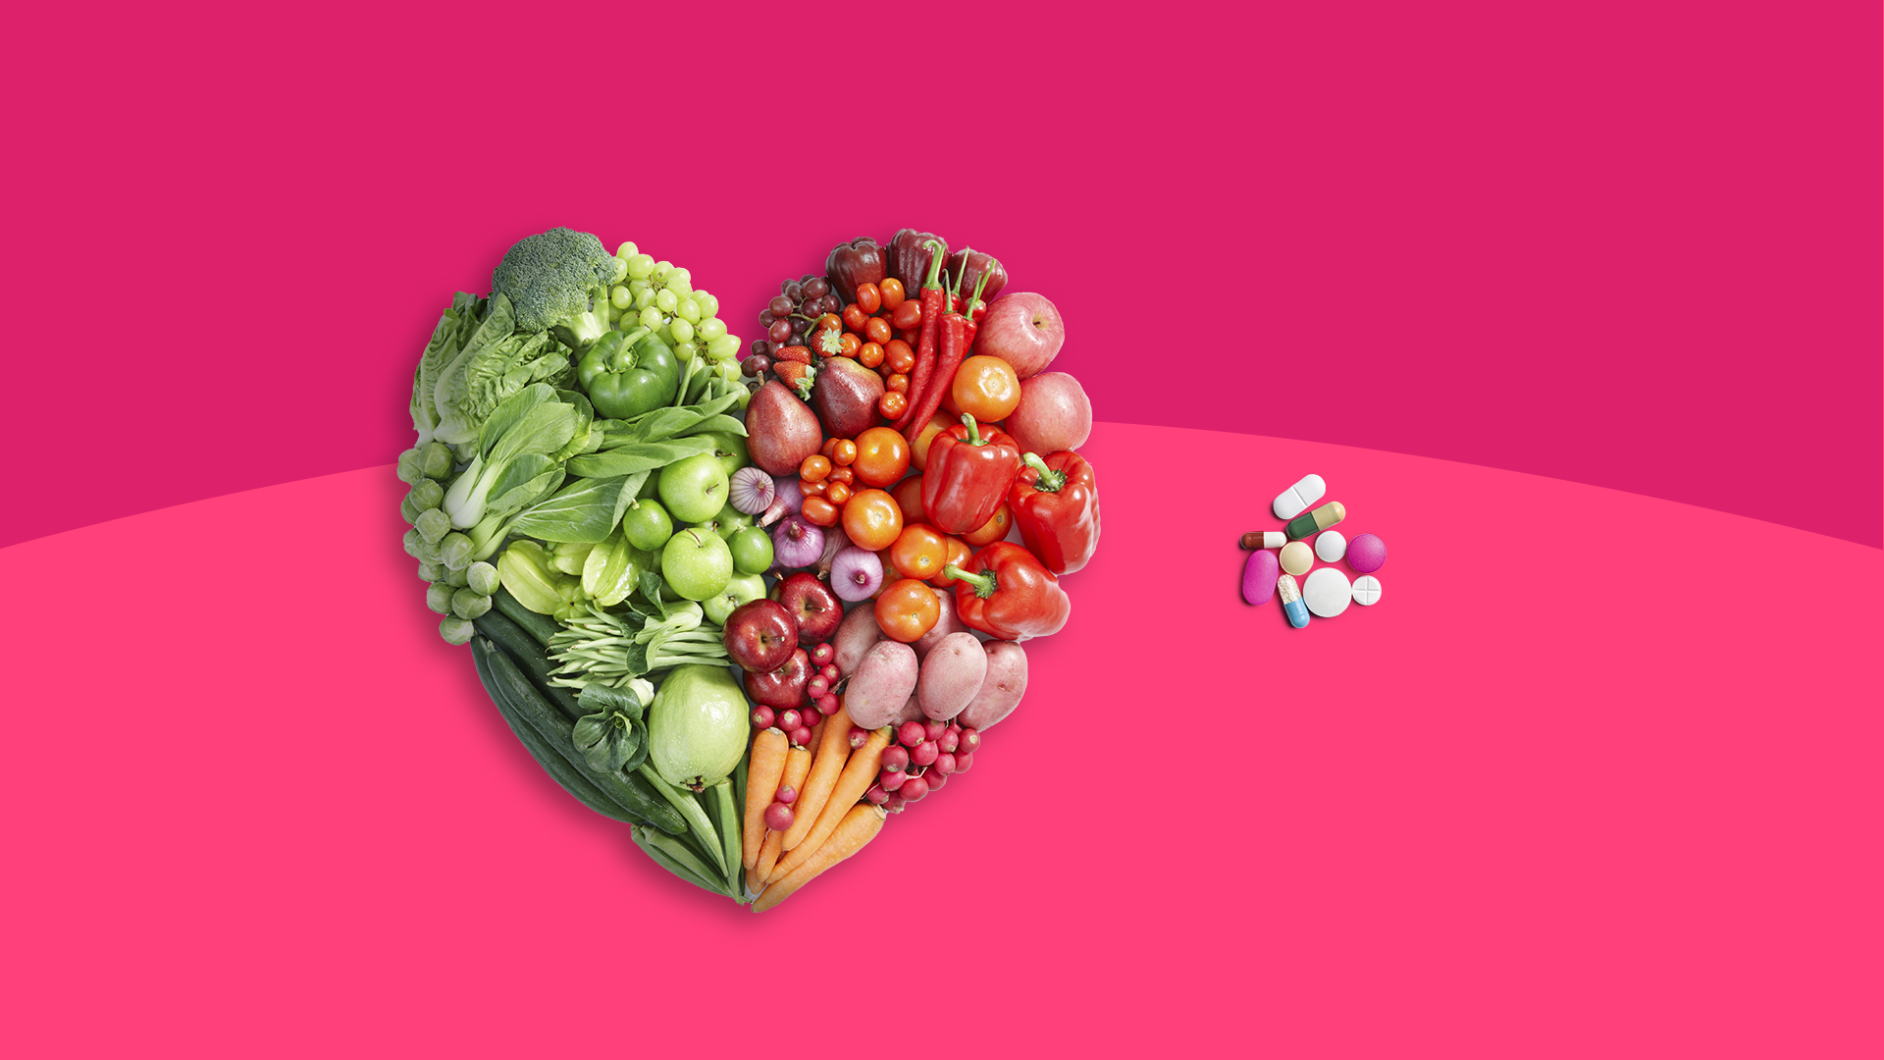 A heart made of vegetables represents nutrient deficiency